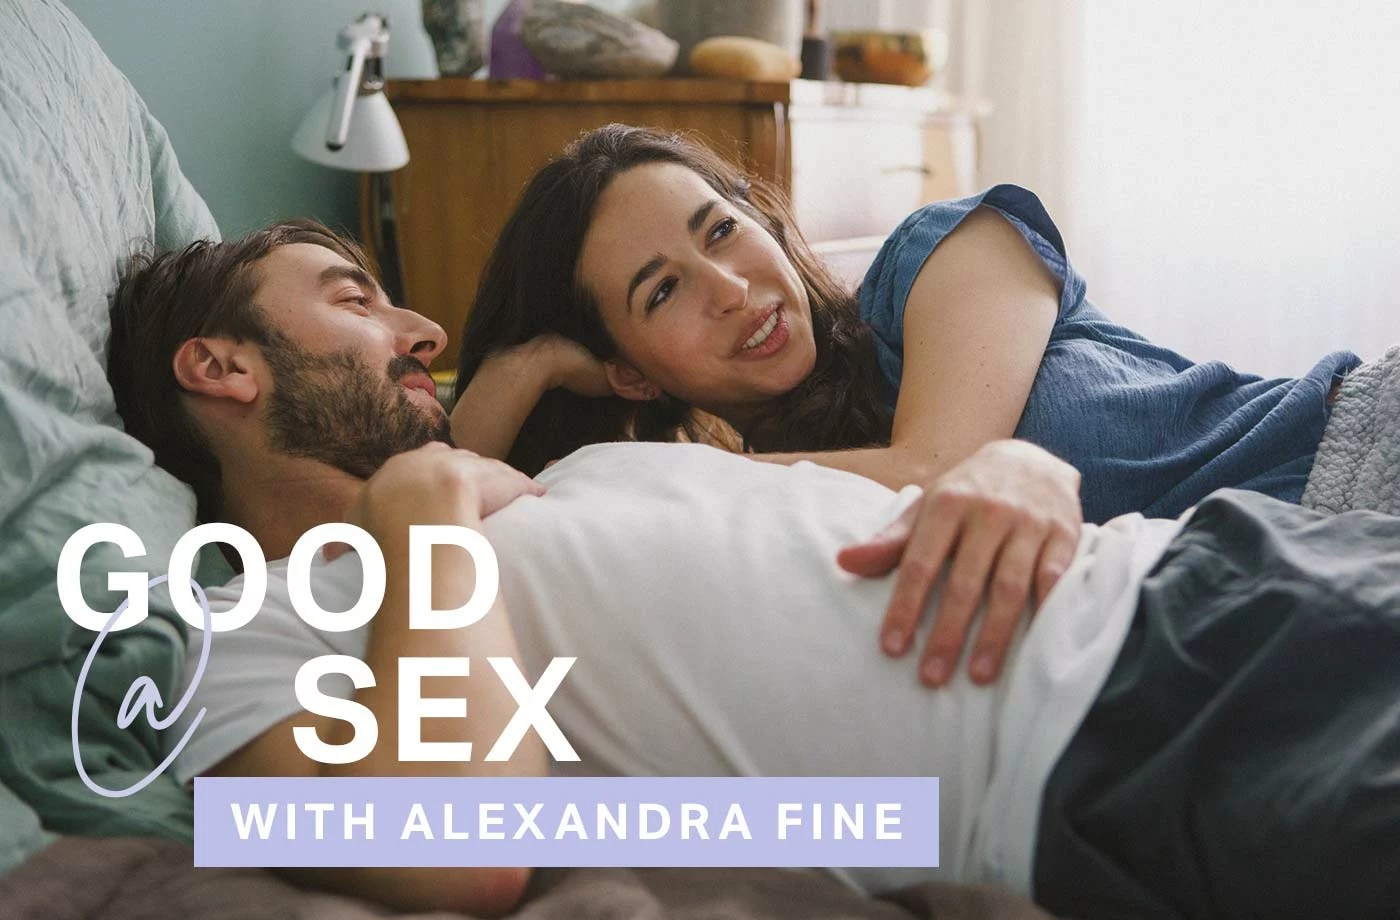 Is It a Bad Sign If I Prefer to Masturbate Over Having Sex With My Partner?